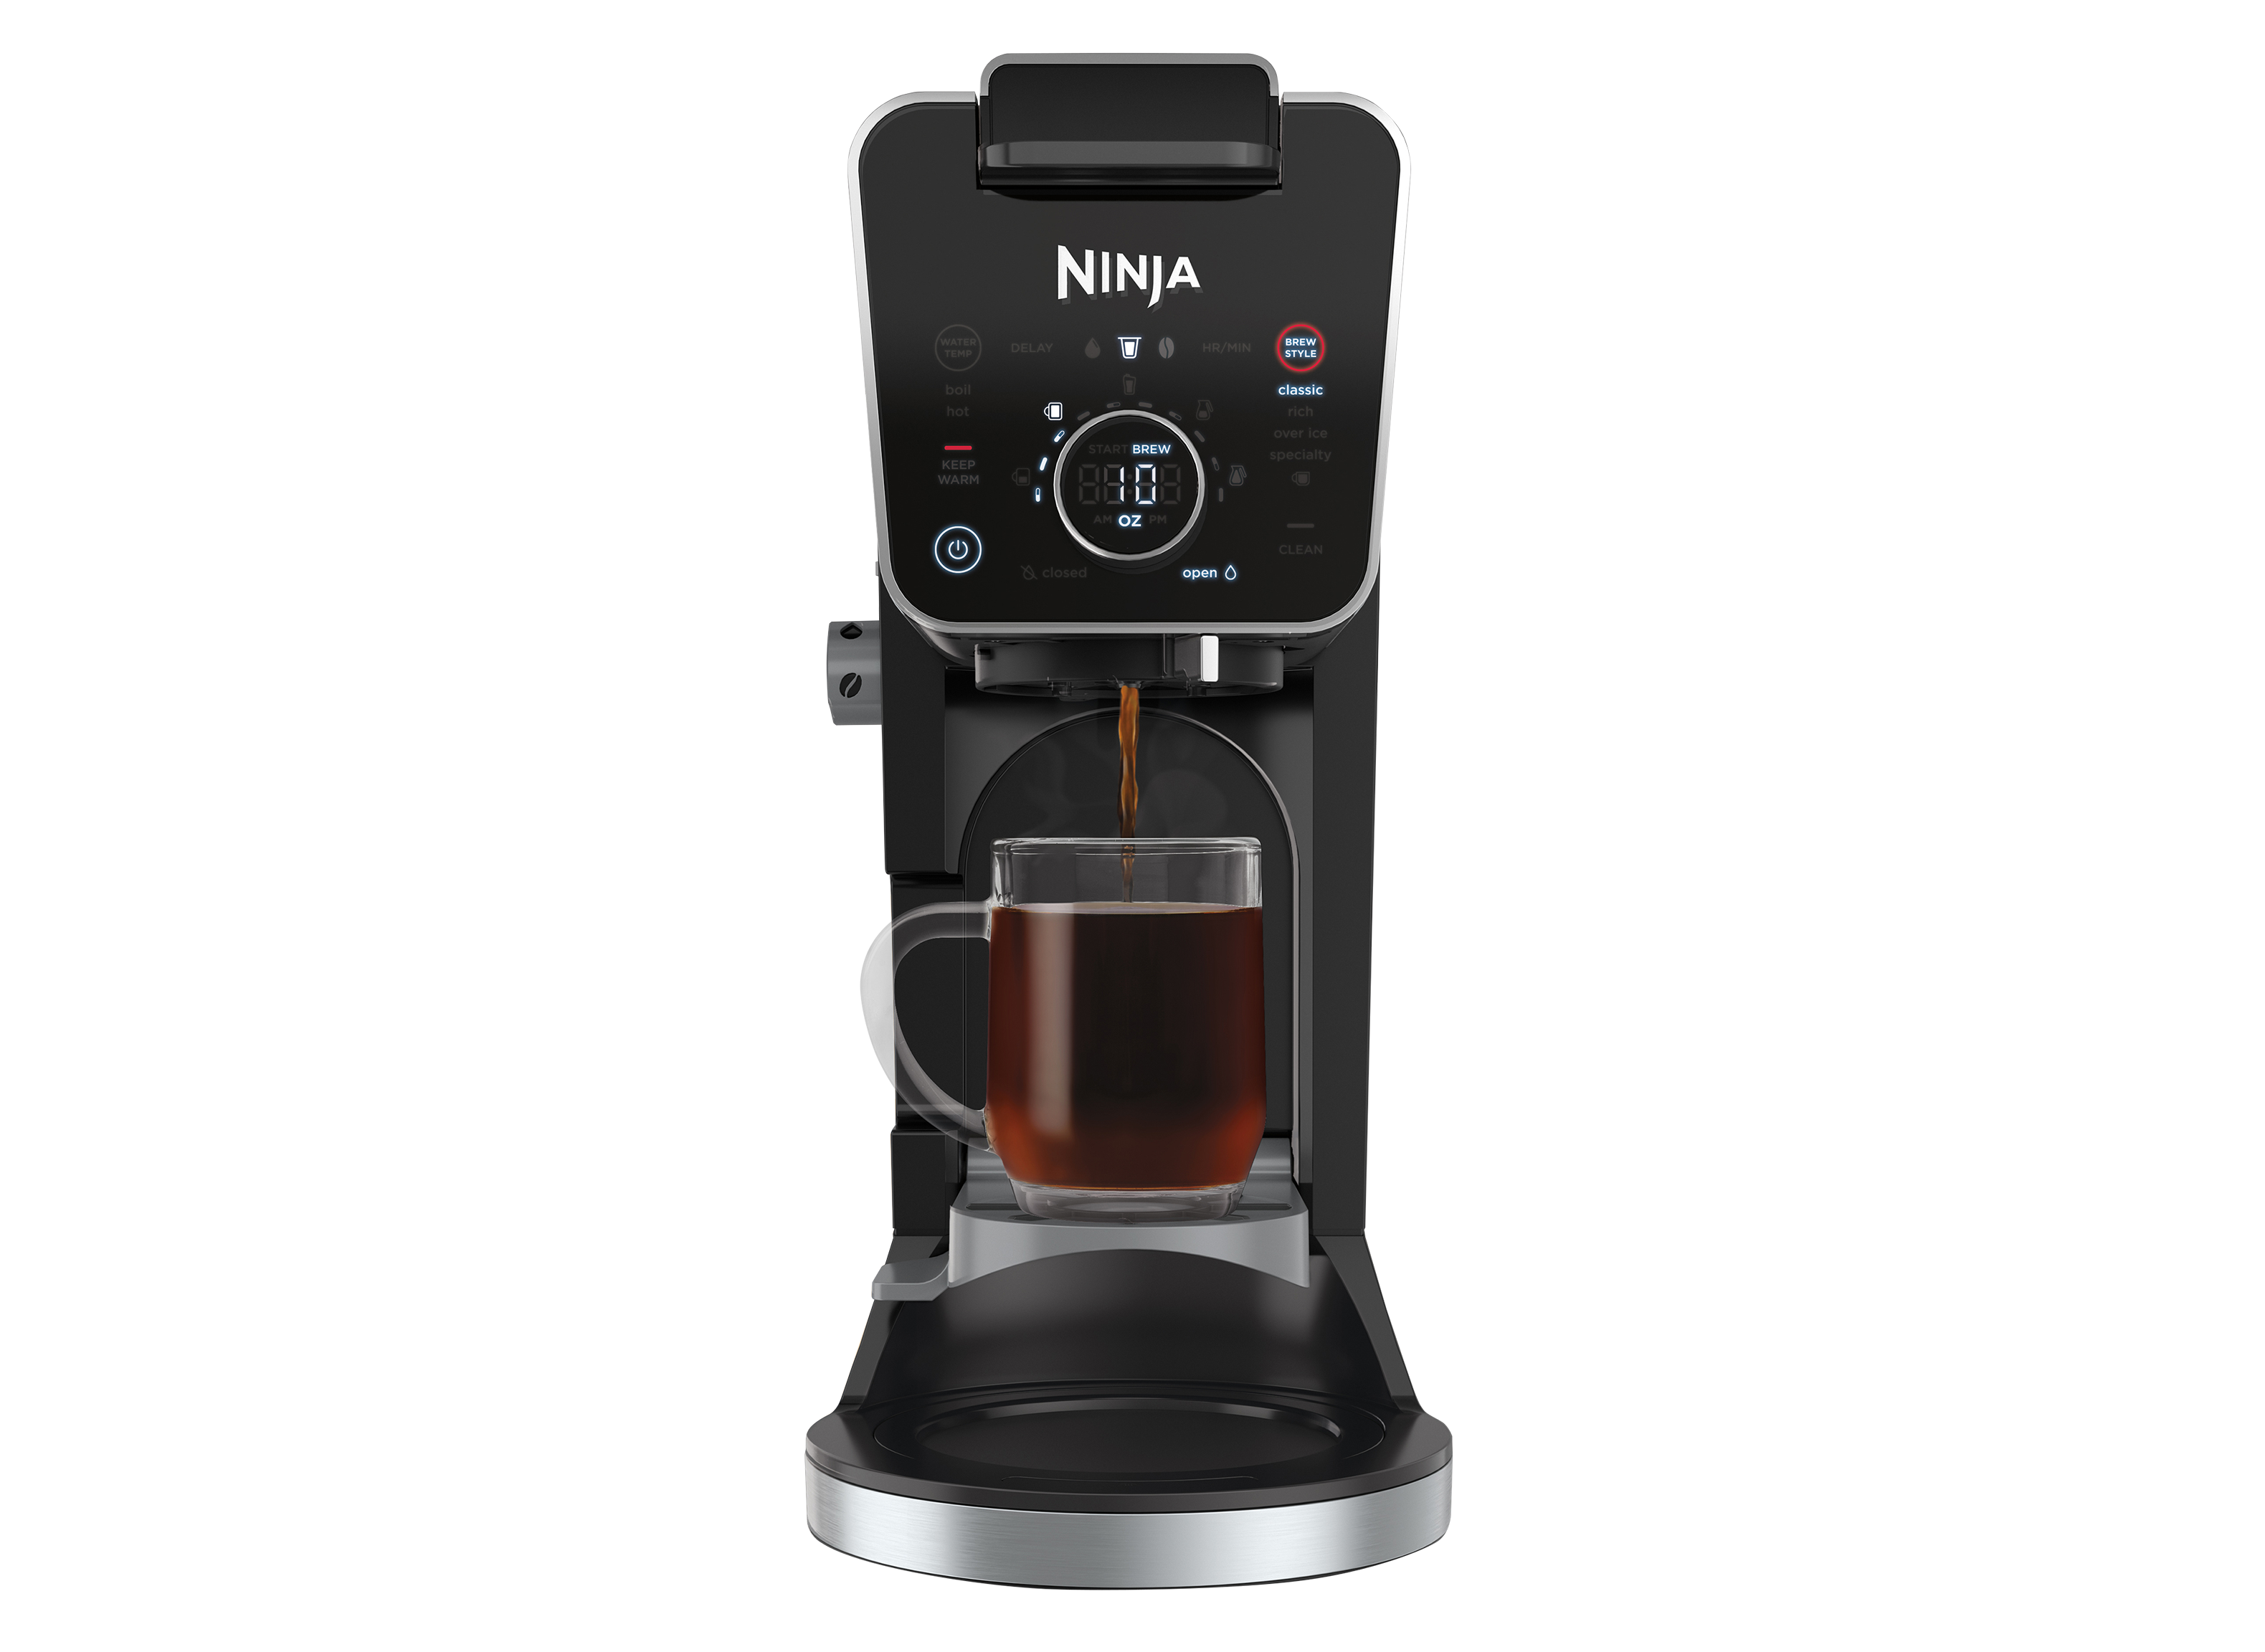 https://crdms.images.consumerreports.org/prod/products/cr/models/405571-drip-coffee-makers-with-carafe-ninja-dualbrew-pro-12-cup-cfp301-10026481.png